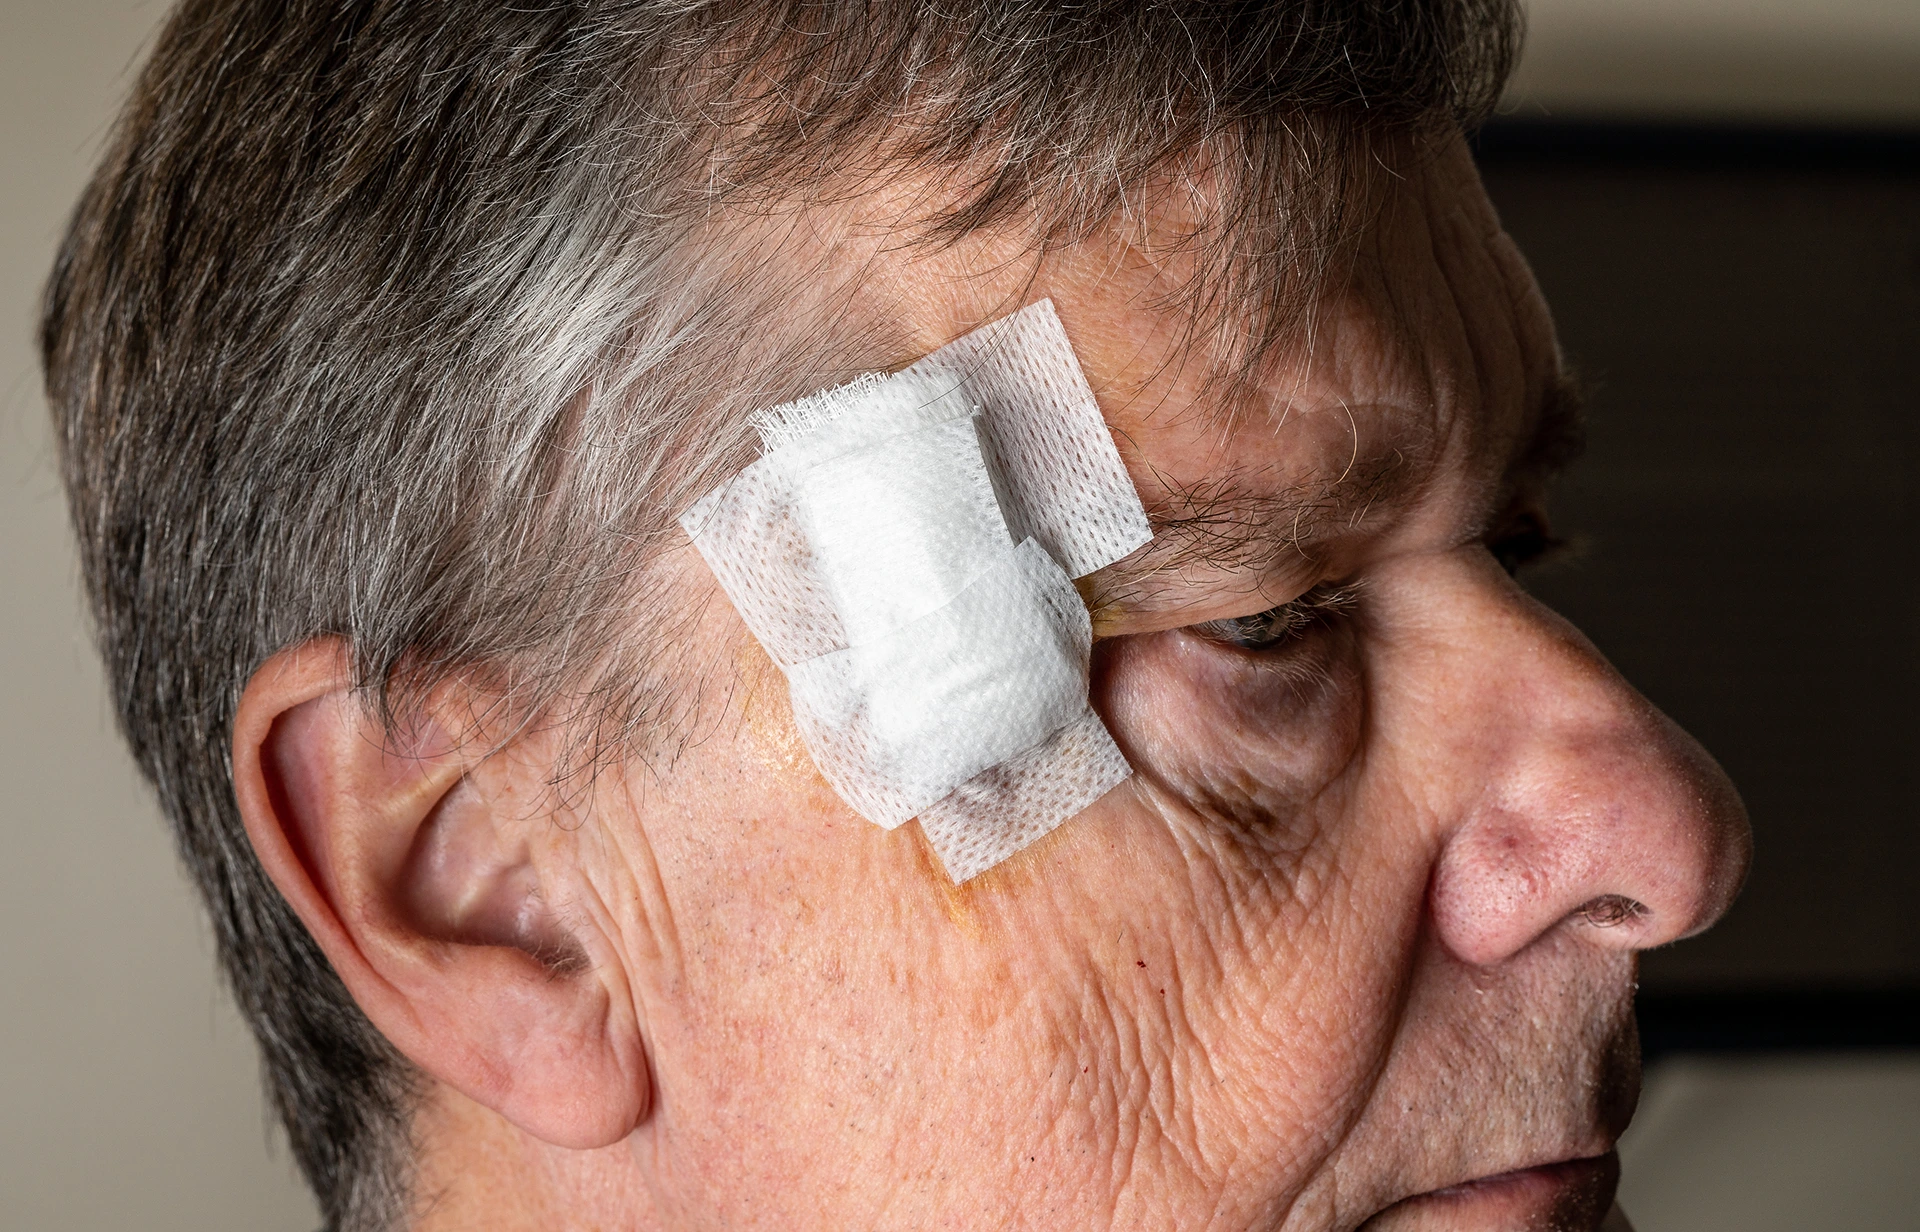 A man with a bandaged wound on his forehead.